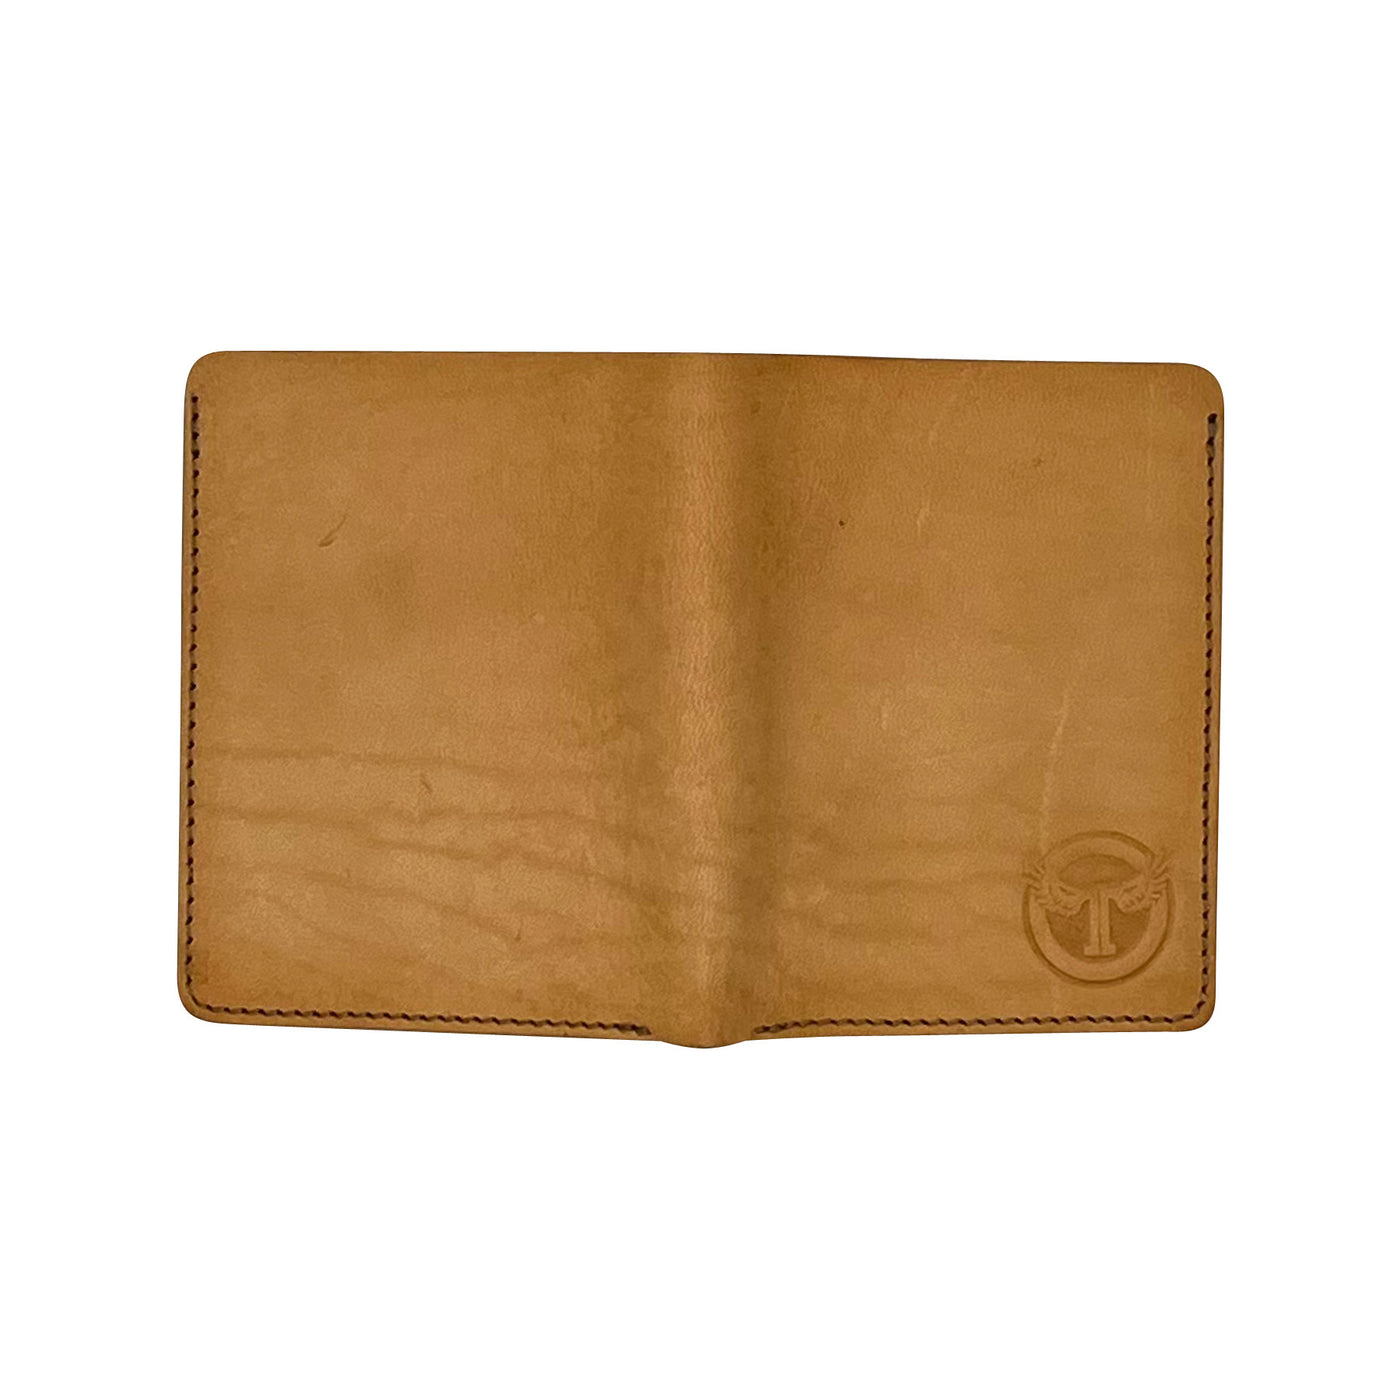 Thedi Leathers Wallet Card Holder Natural